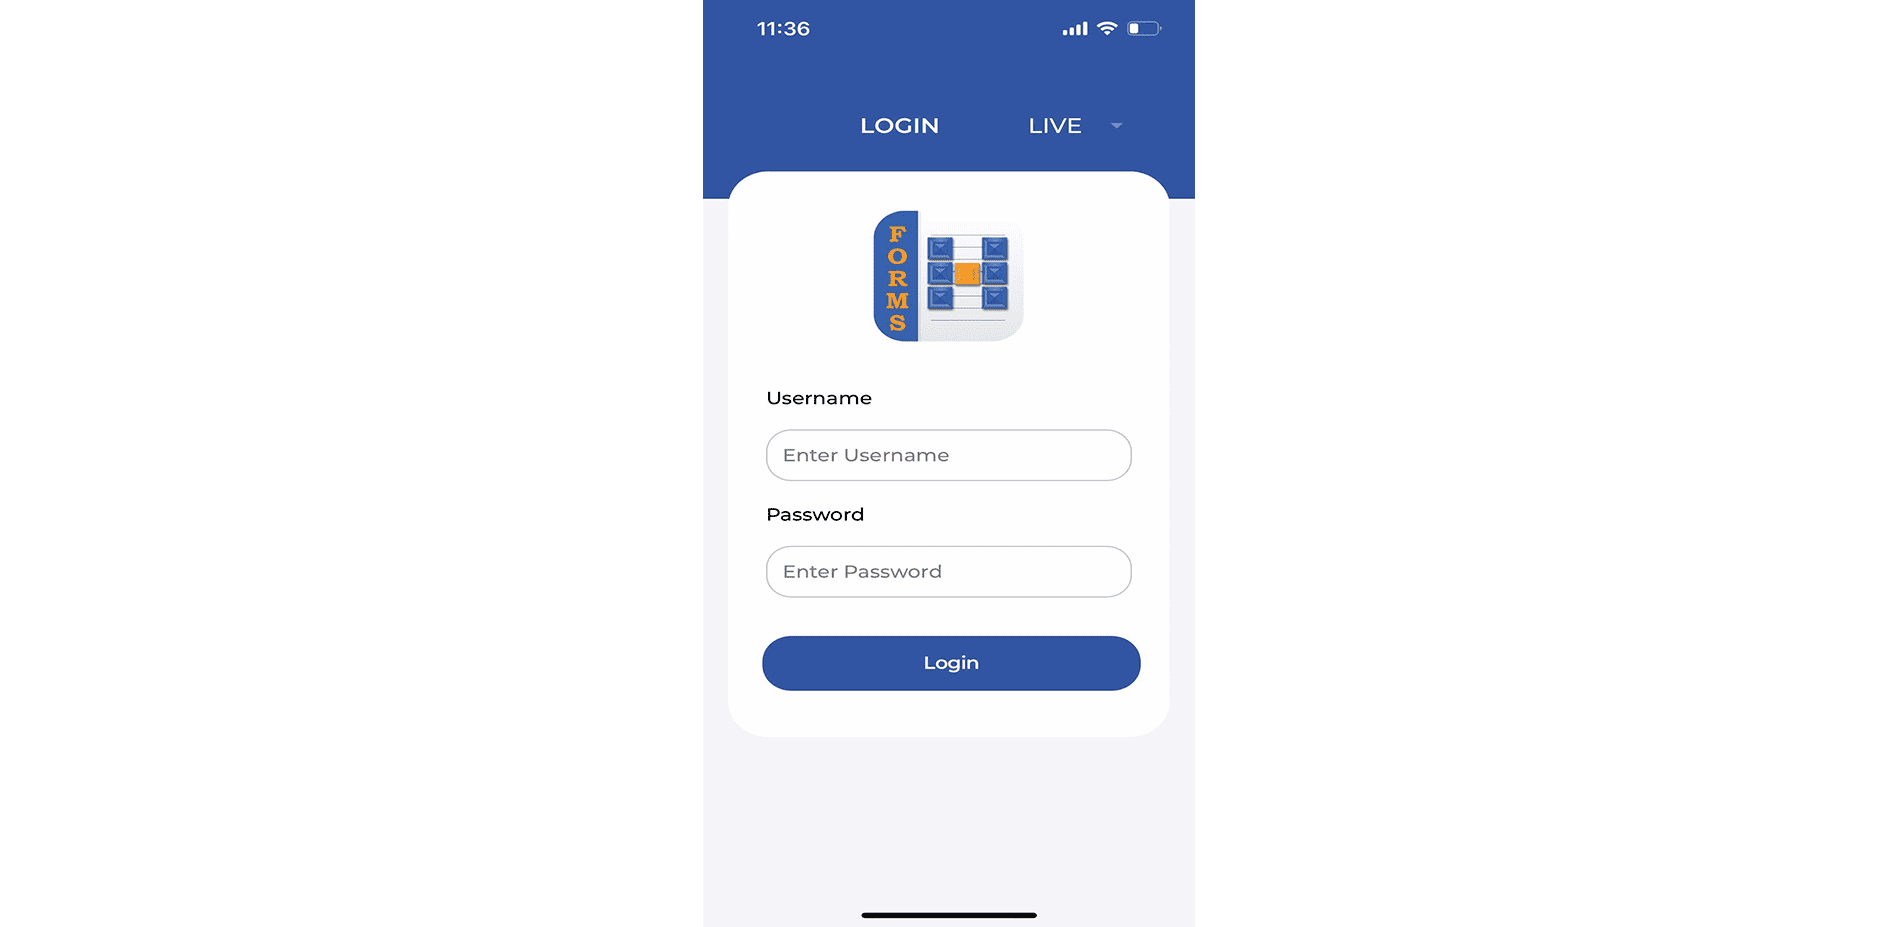 react native app for ERP/CRM system